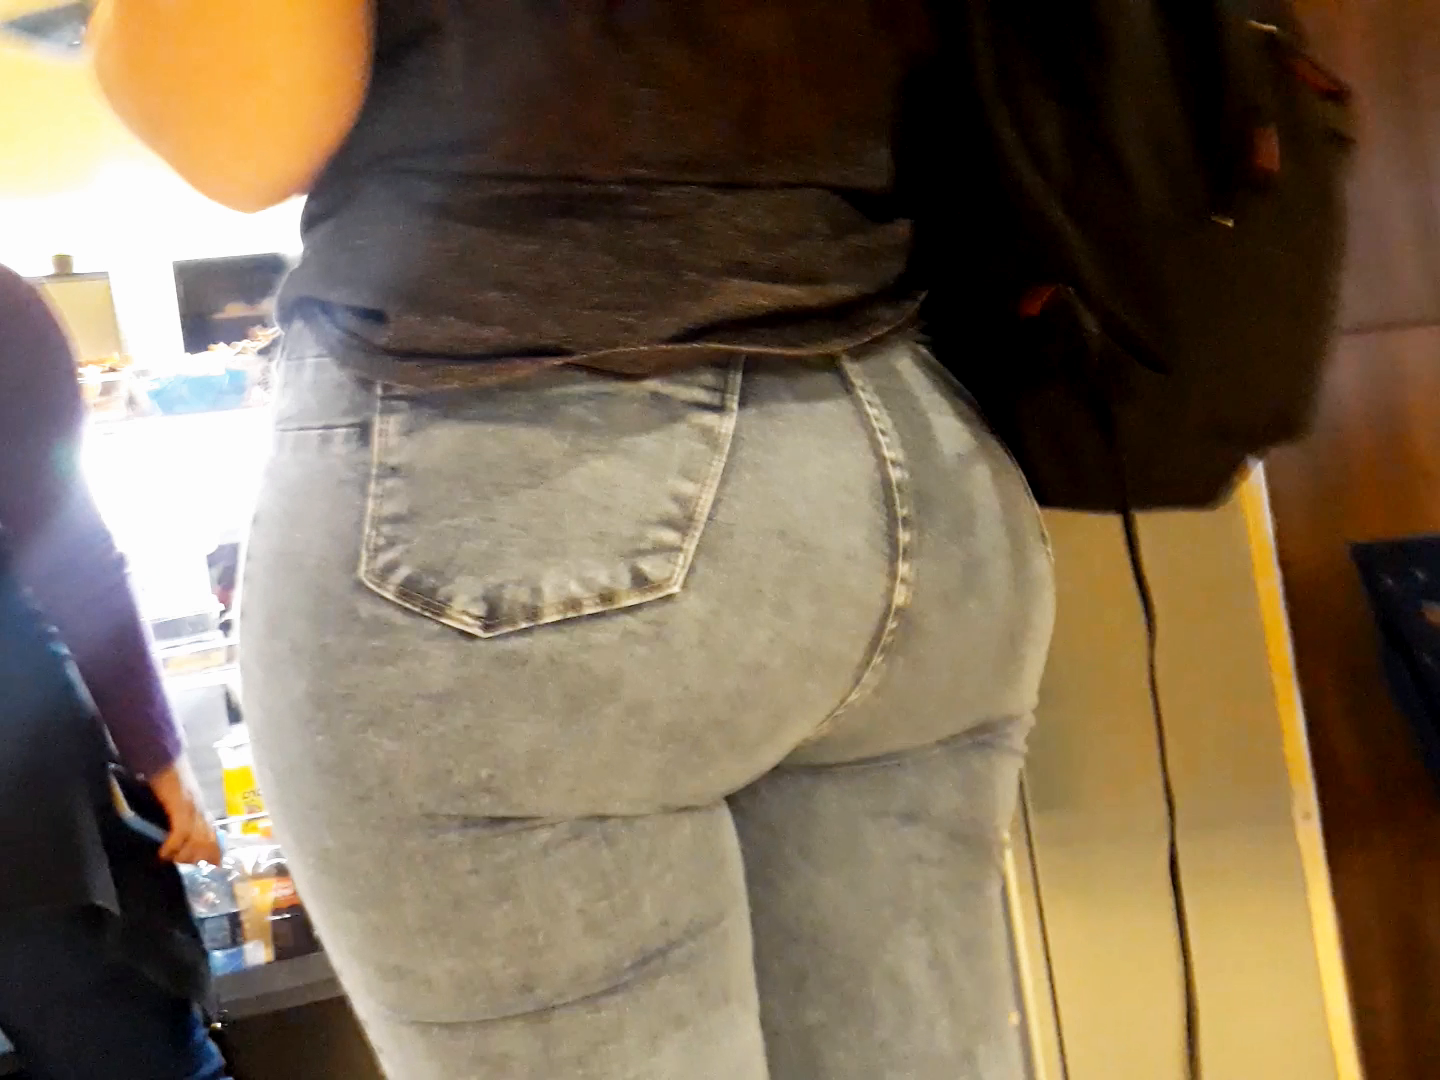 Tight Jeans Porn - Big Round Ass in Tight Jeans - Porn Videos & Photos - EroMe